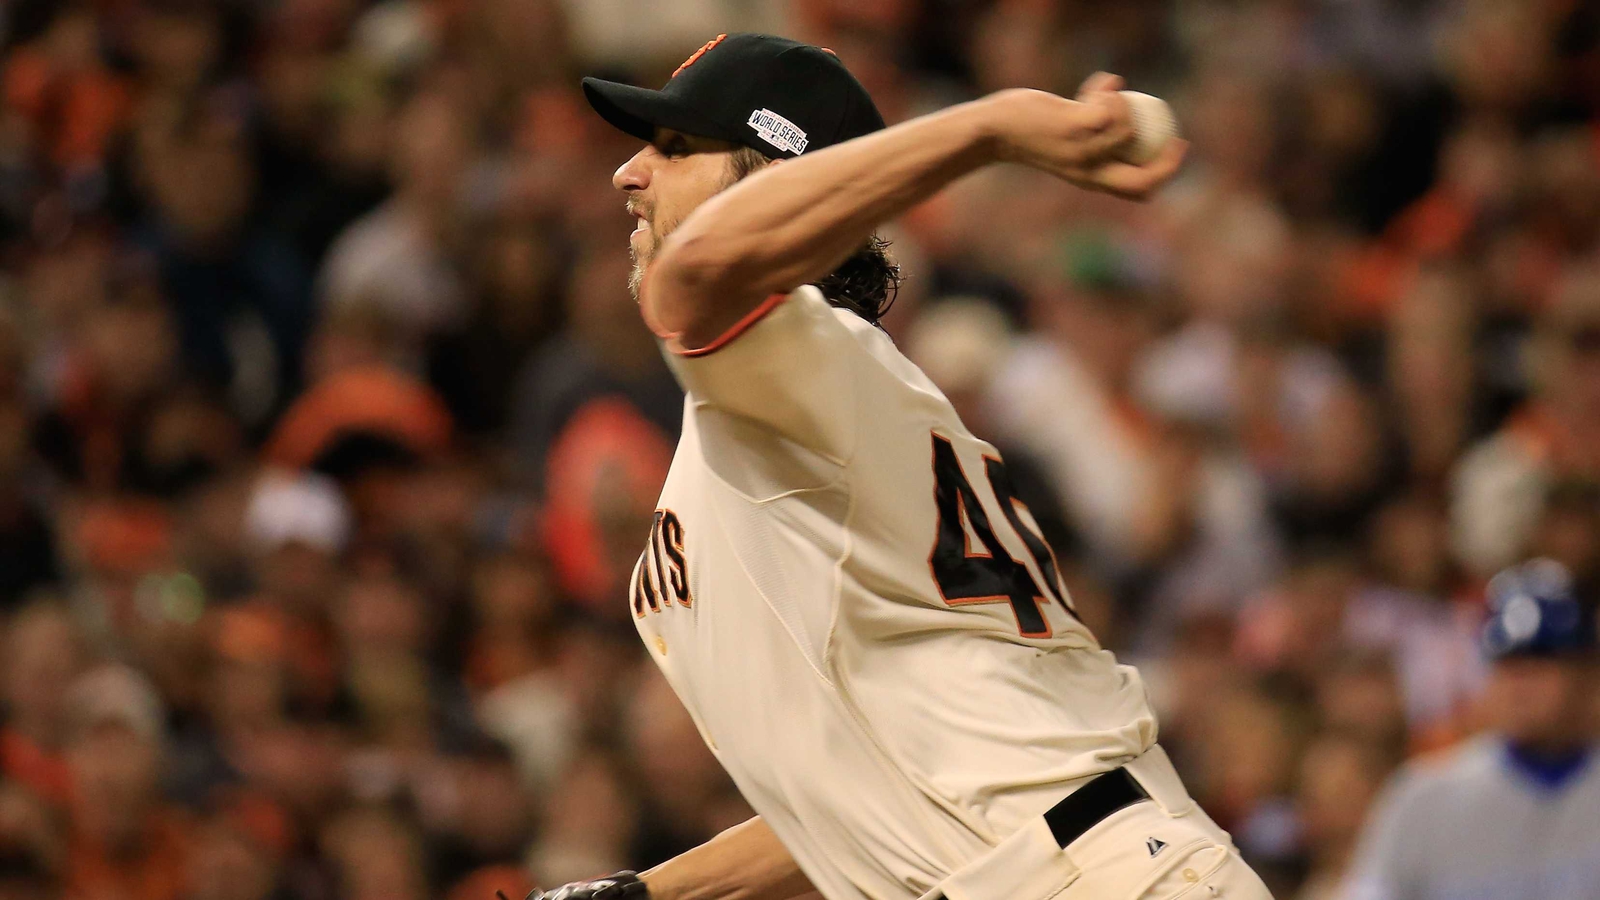 WORLD SERIES: Bumgarner pitches Giants to within a win of title